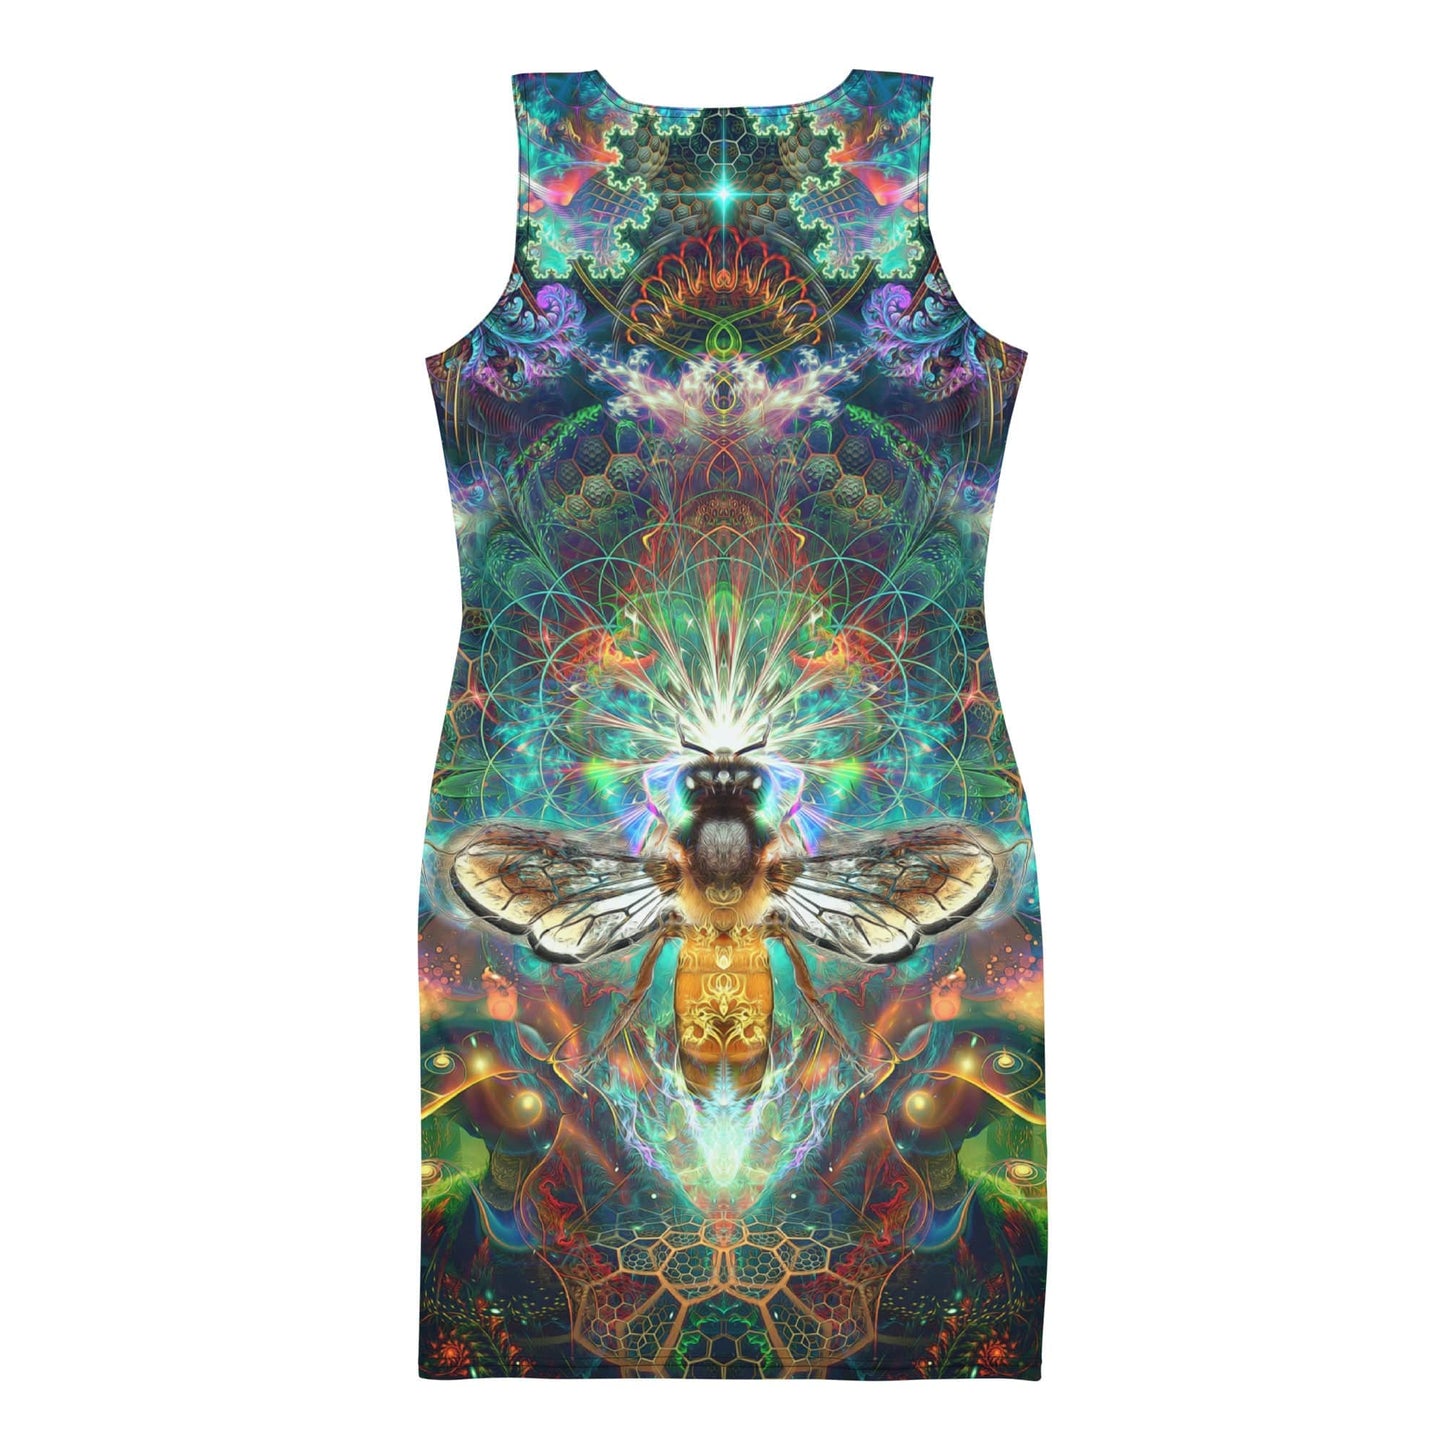 "To Bee or Not to Bee" Bodycon FITTED DRESS